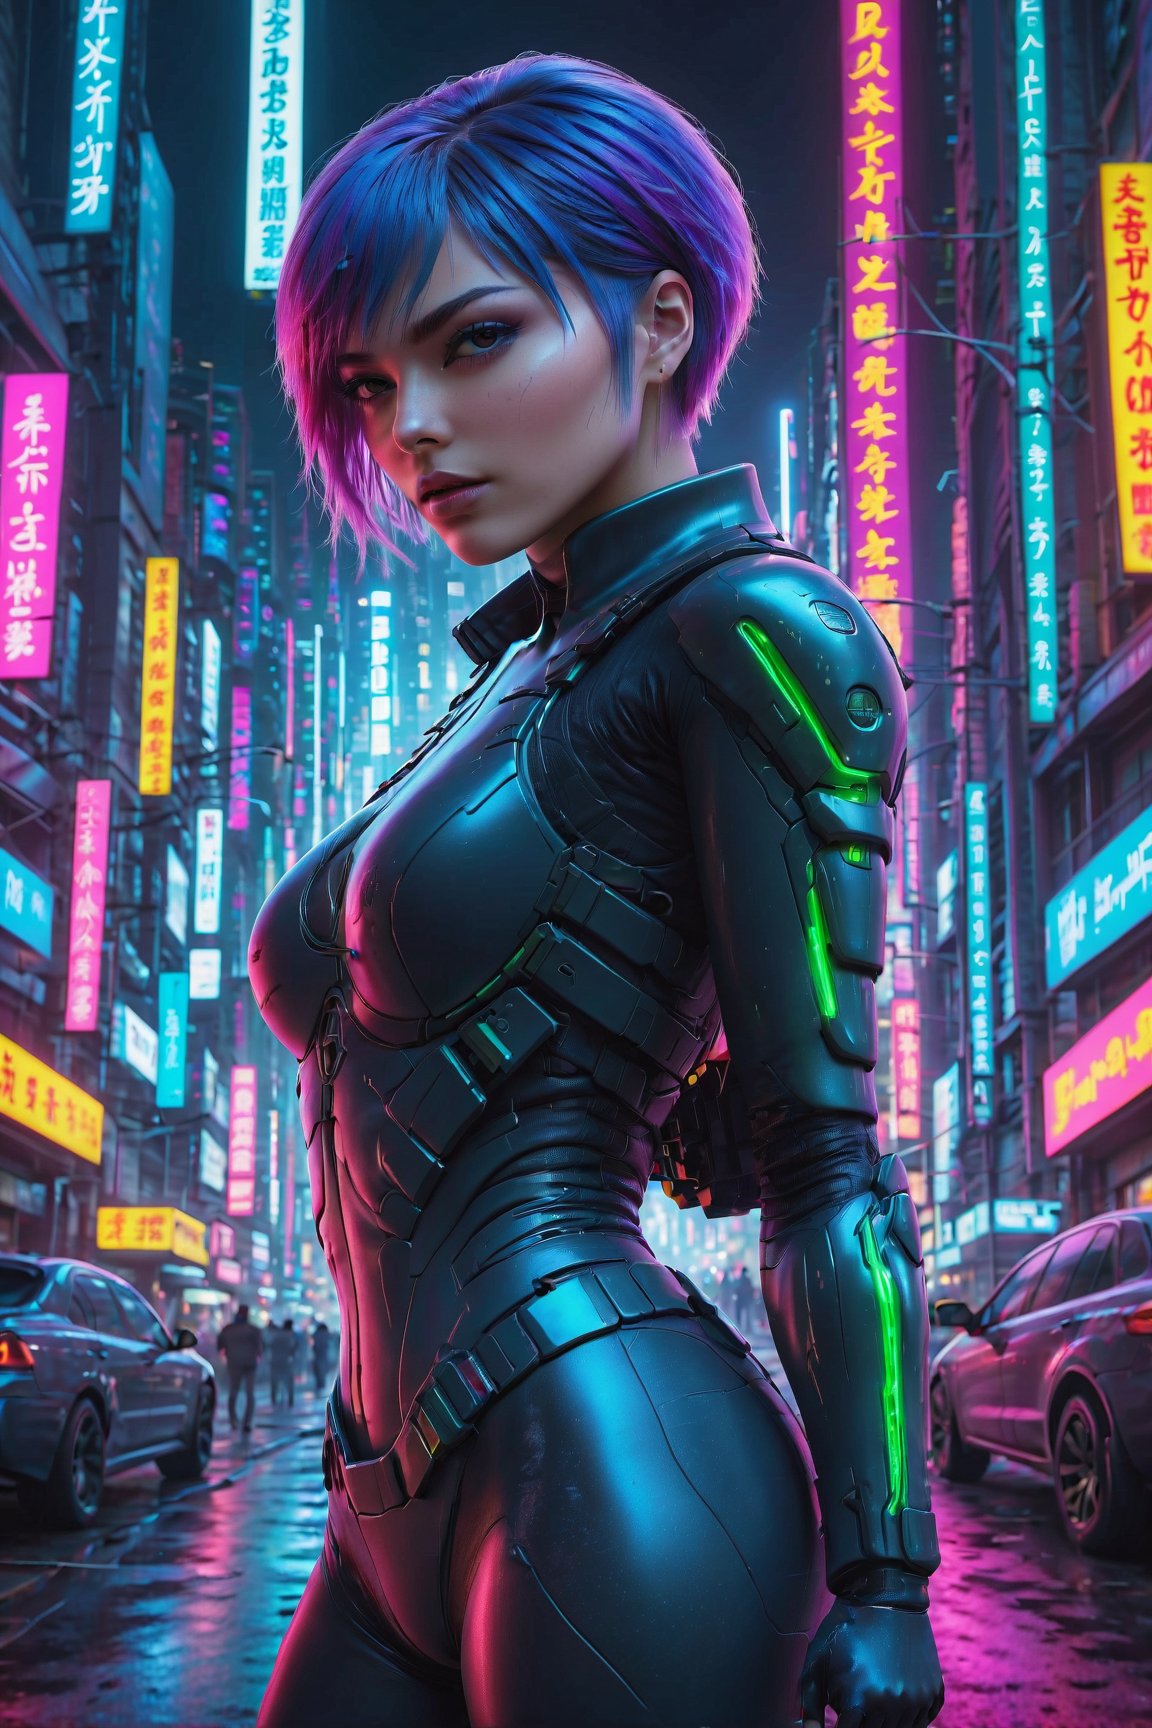 (best quality,4k,8k,highres,masterpiece:1.2),ultra-detailed,(realistic,photorealistic,photo-realistic:1.37),neon background with (beautiful,gorgeous,striking,mesmerizing,breathtaking:radiant:1.2) girl, (vibrant electrifying,colored) lights reflecting on (the girl's face,her skin), (brightly glowing,shimmering:) neon signs in the background, (luminous emanating) aura surrounding the girl, (intense,exquisite) attention given to the girl's (sparkling mesmerizing) eyes, (softly glowing,fluorescent) hair flowing in the wind, (stylish,modern) outfit emphasizing the girl's grace, (captivating,alluring) gaze, (futuristic,urban) atmosphere, (electric energy,pulsating vibe) filling the scene, (dynamic,energetic) pose of the girl, (mysterious,eneigmatic) smile, (dreamlike,hypnotic) atmosphere with a touch of (graceful,sensual) femininity and (teasing,charming) allure, (contrast,balance) of vibrant colors and (mysterious,dark) shadows, perfect harmony between the girl and her (luminous,illuminated) surroundings, (cinematic,immersive) lighting creating an (ethereal,euphoric) ambiance, (rich,bold) color palette enhancing the intensity of the scene, (neon:1.1) glow highlighting the girl's (radiant,glowing) beauty, (magical,enchanted) atmosphere enveloping the (charismatic,captivating) girl, (dramatic,striking) composition with a focus on (stunning,elegant) details.
